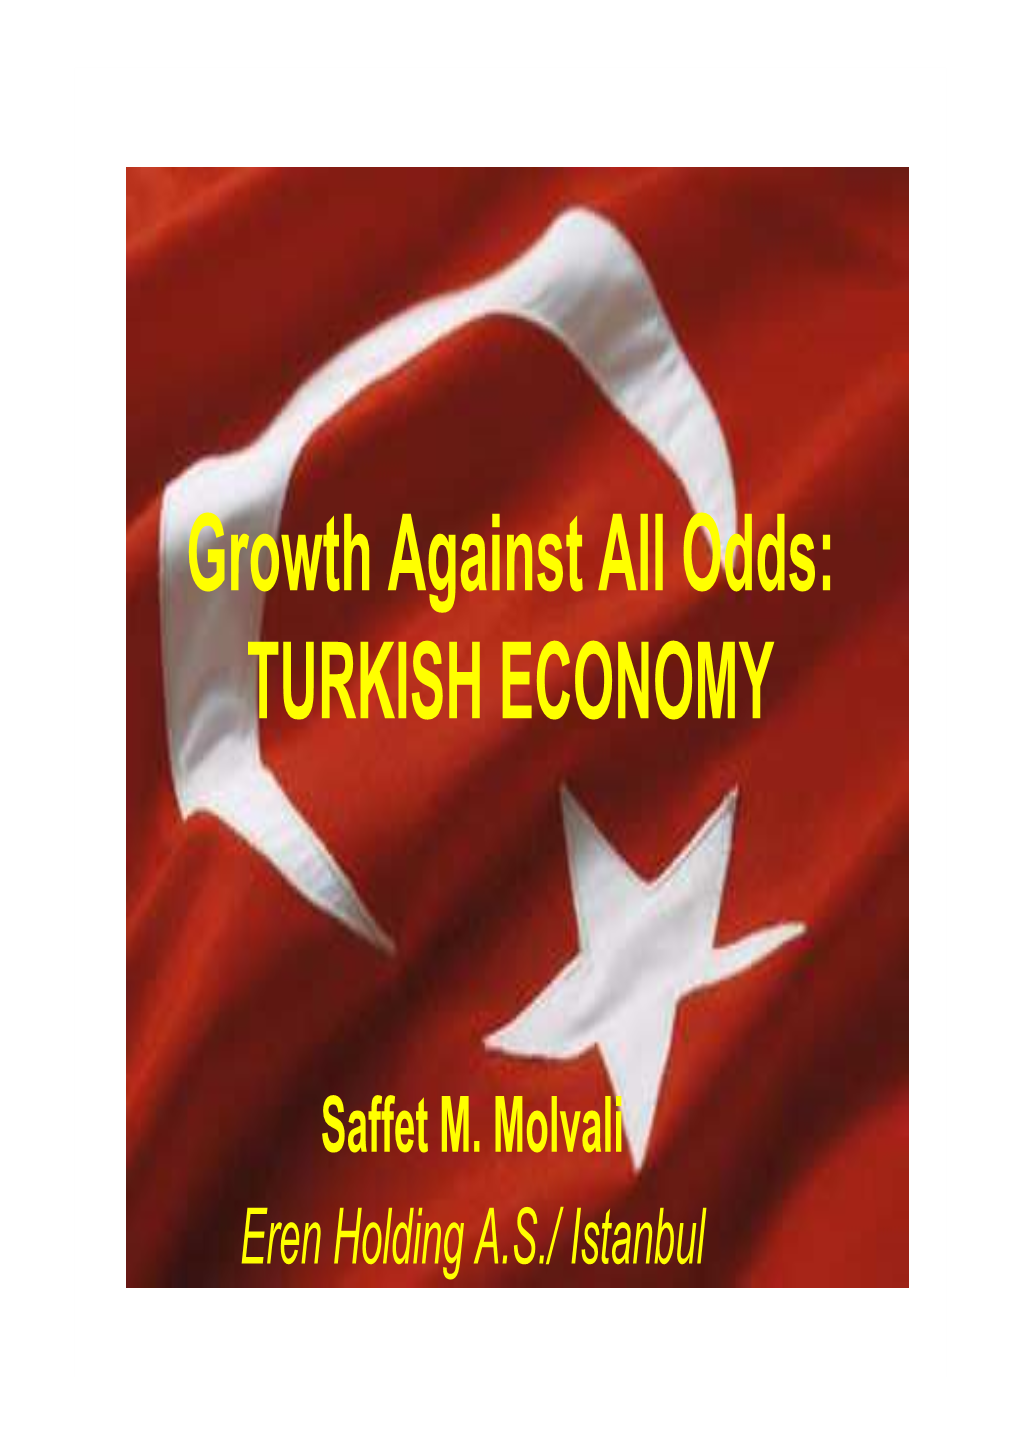 Growth Against All Odds. Turkish Economy